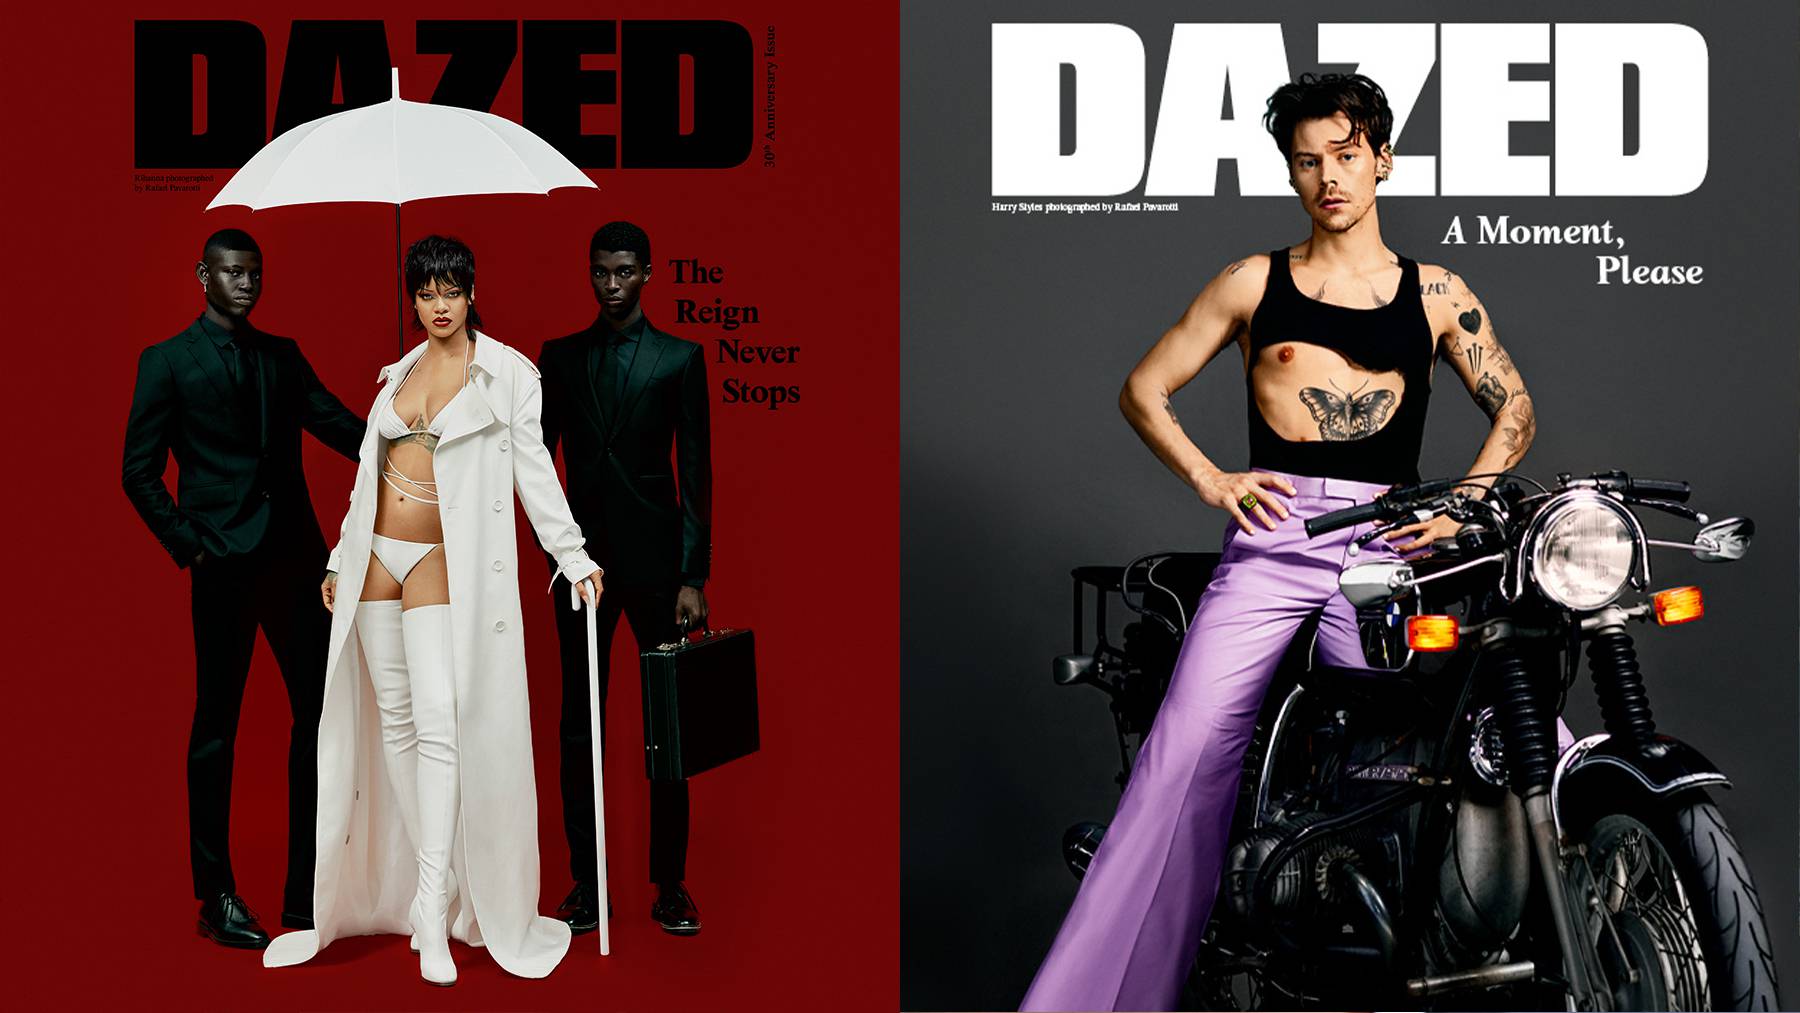 New School represented much of the team behind two recent Dazed cover images.